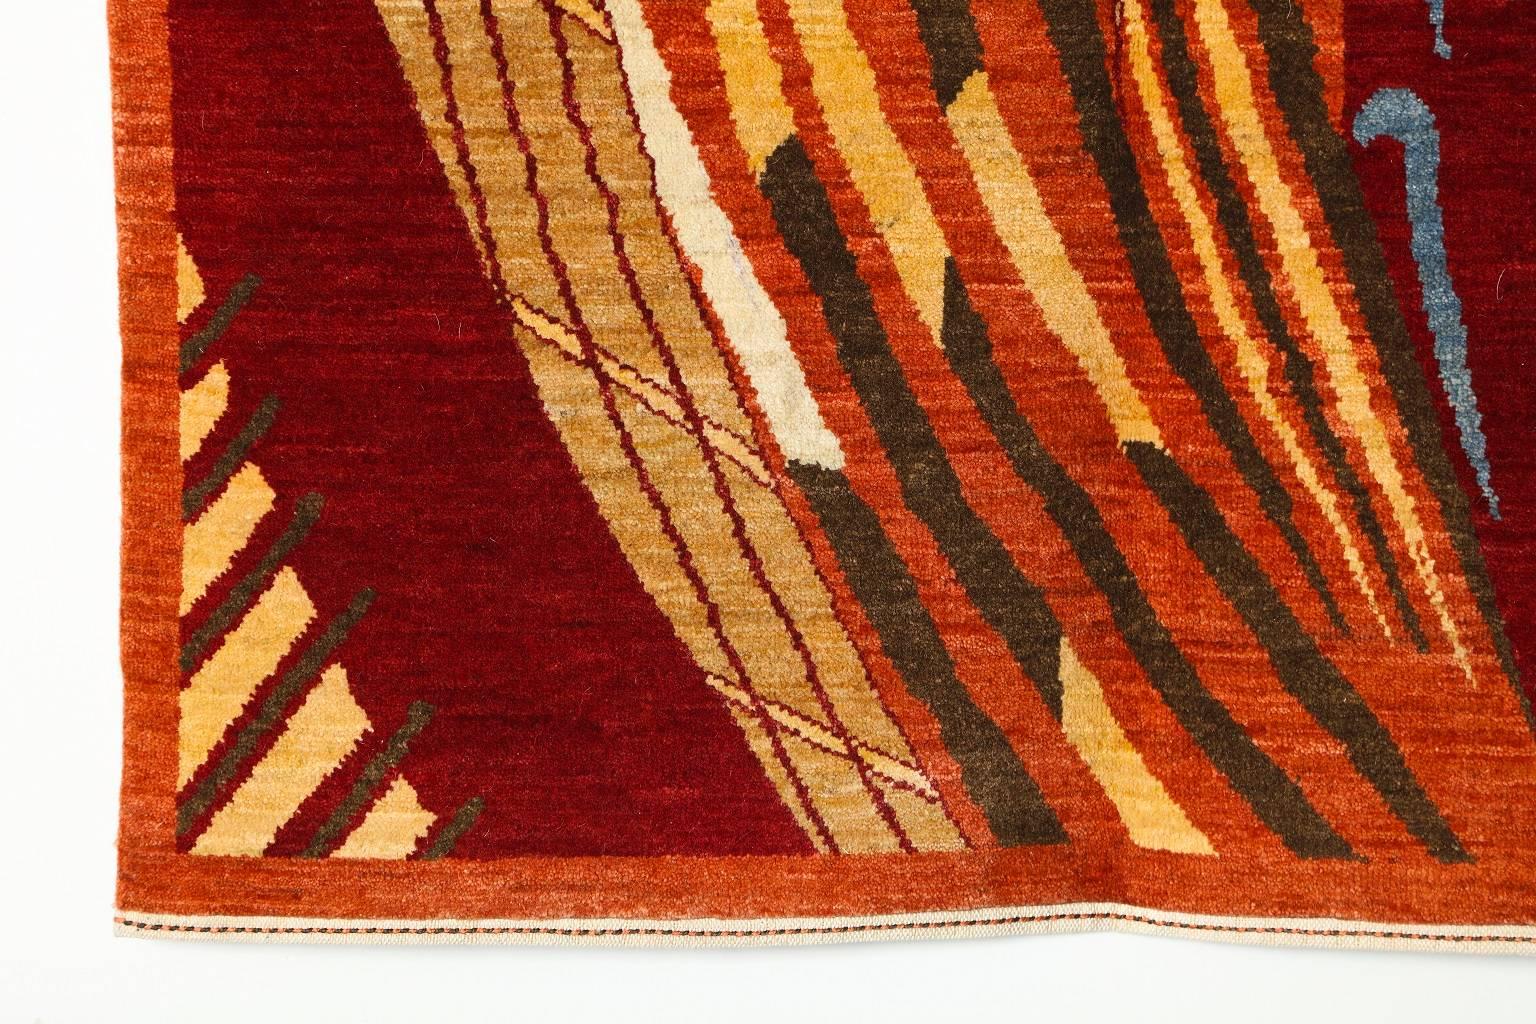 Vegetable Dyed Orley Shabahang Signature Carpet in Handspun Wool and Vegetable Dyes